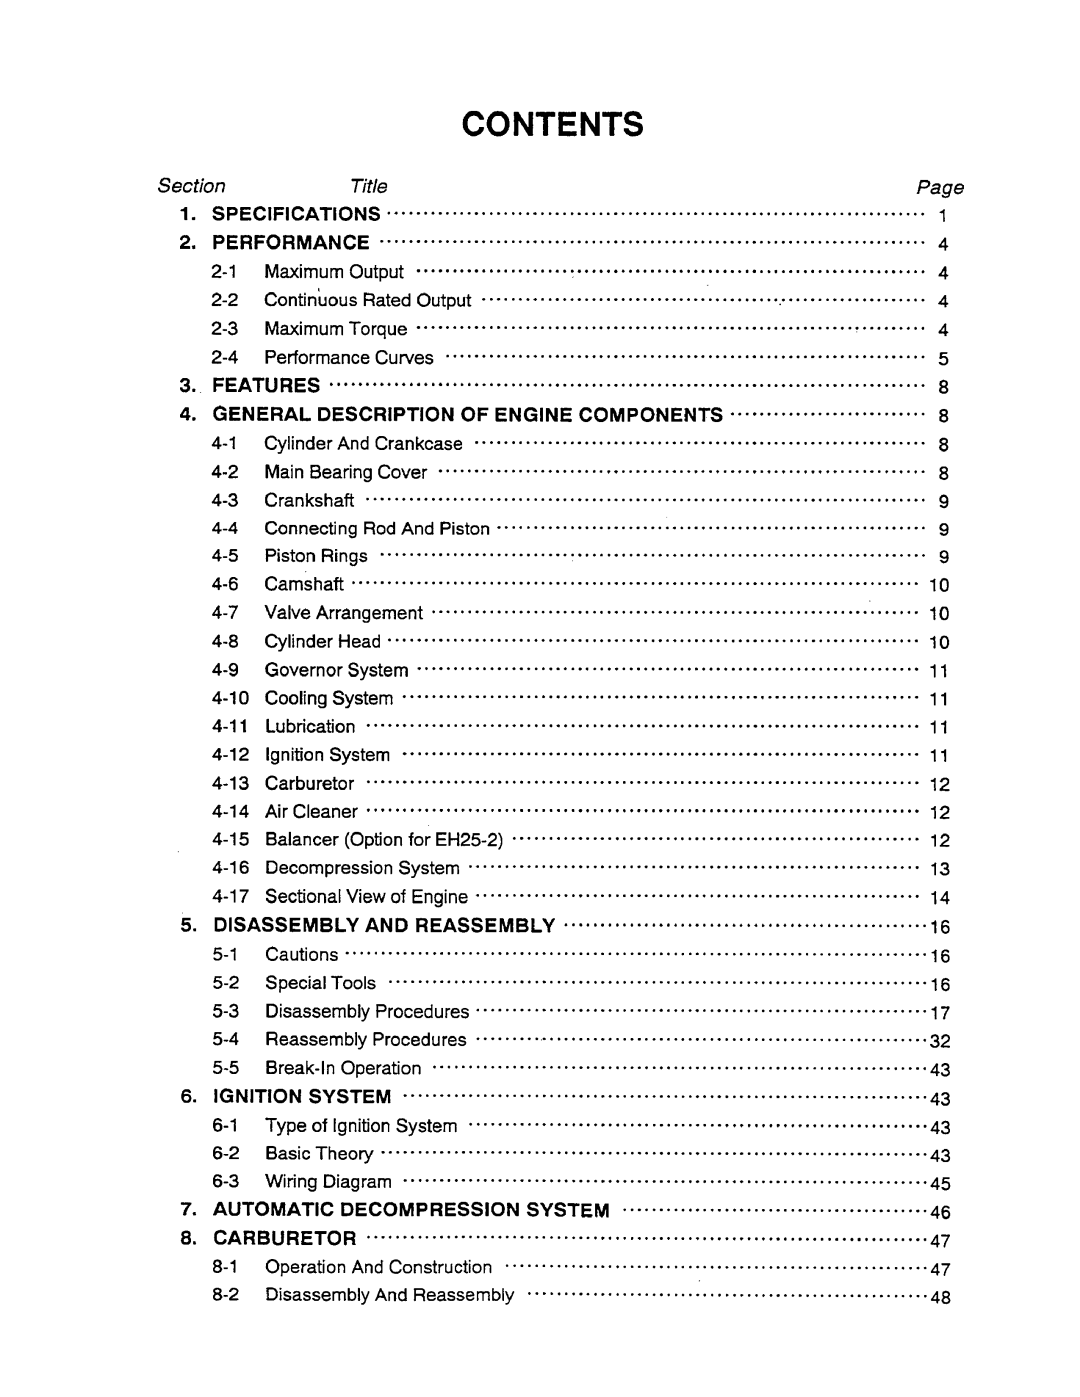 Subaru Robin Power Products EH12-2, EH17-2, EH25-2 manual Contents, Section, Title, Page 